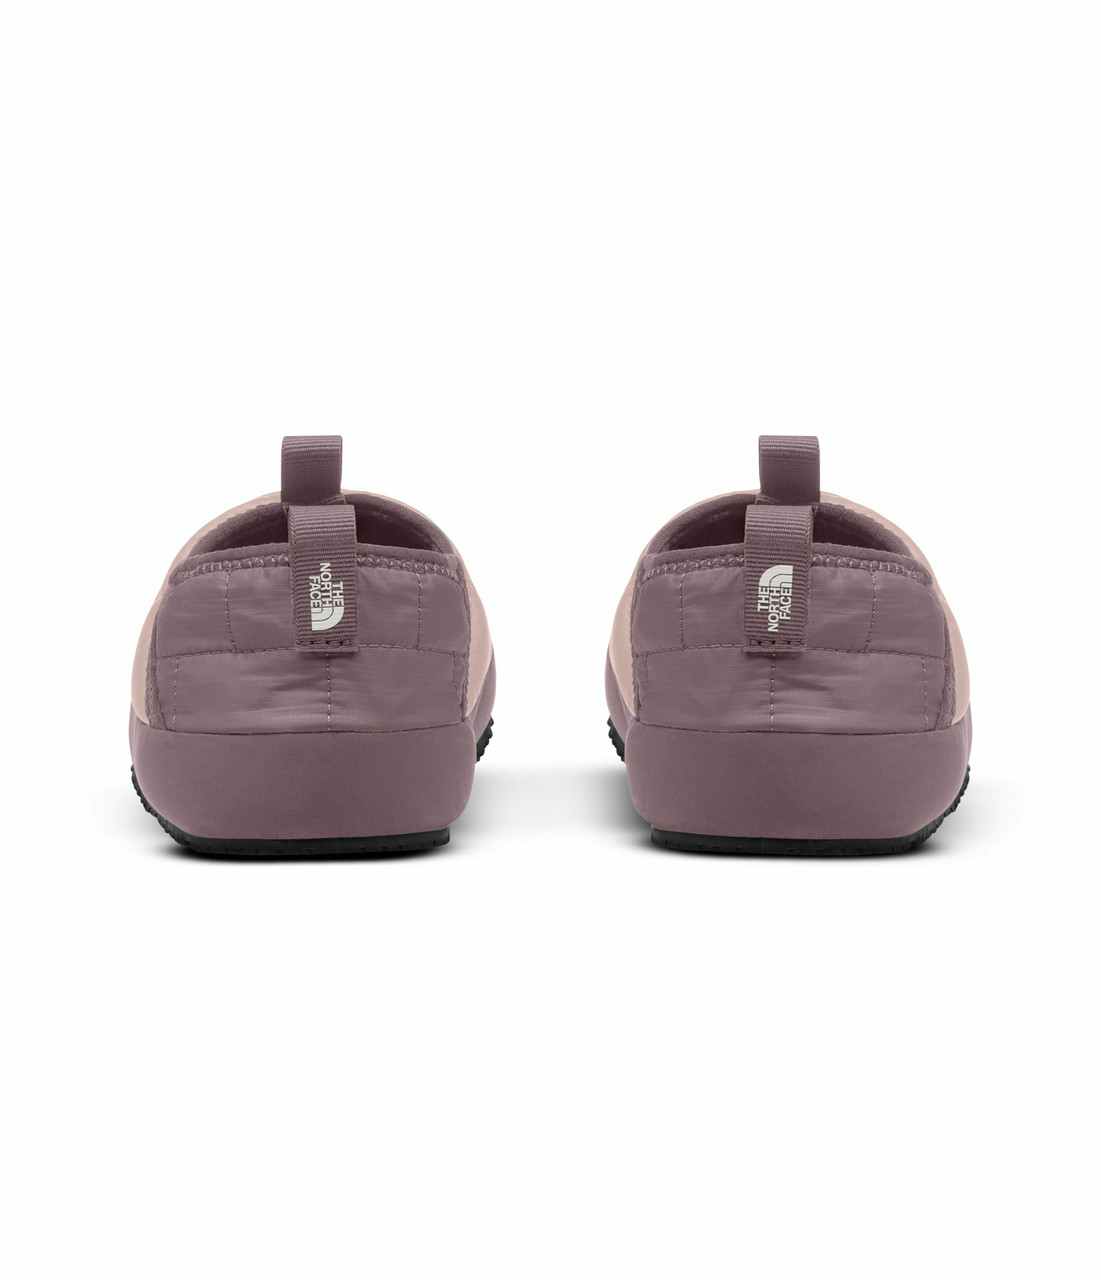 Thermoball Traction Mules Pink Moss/Fawn Grey